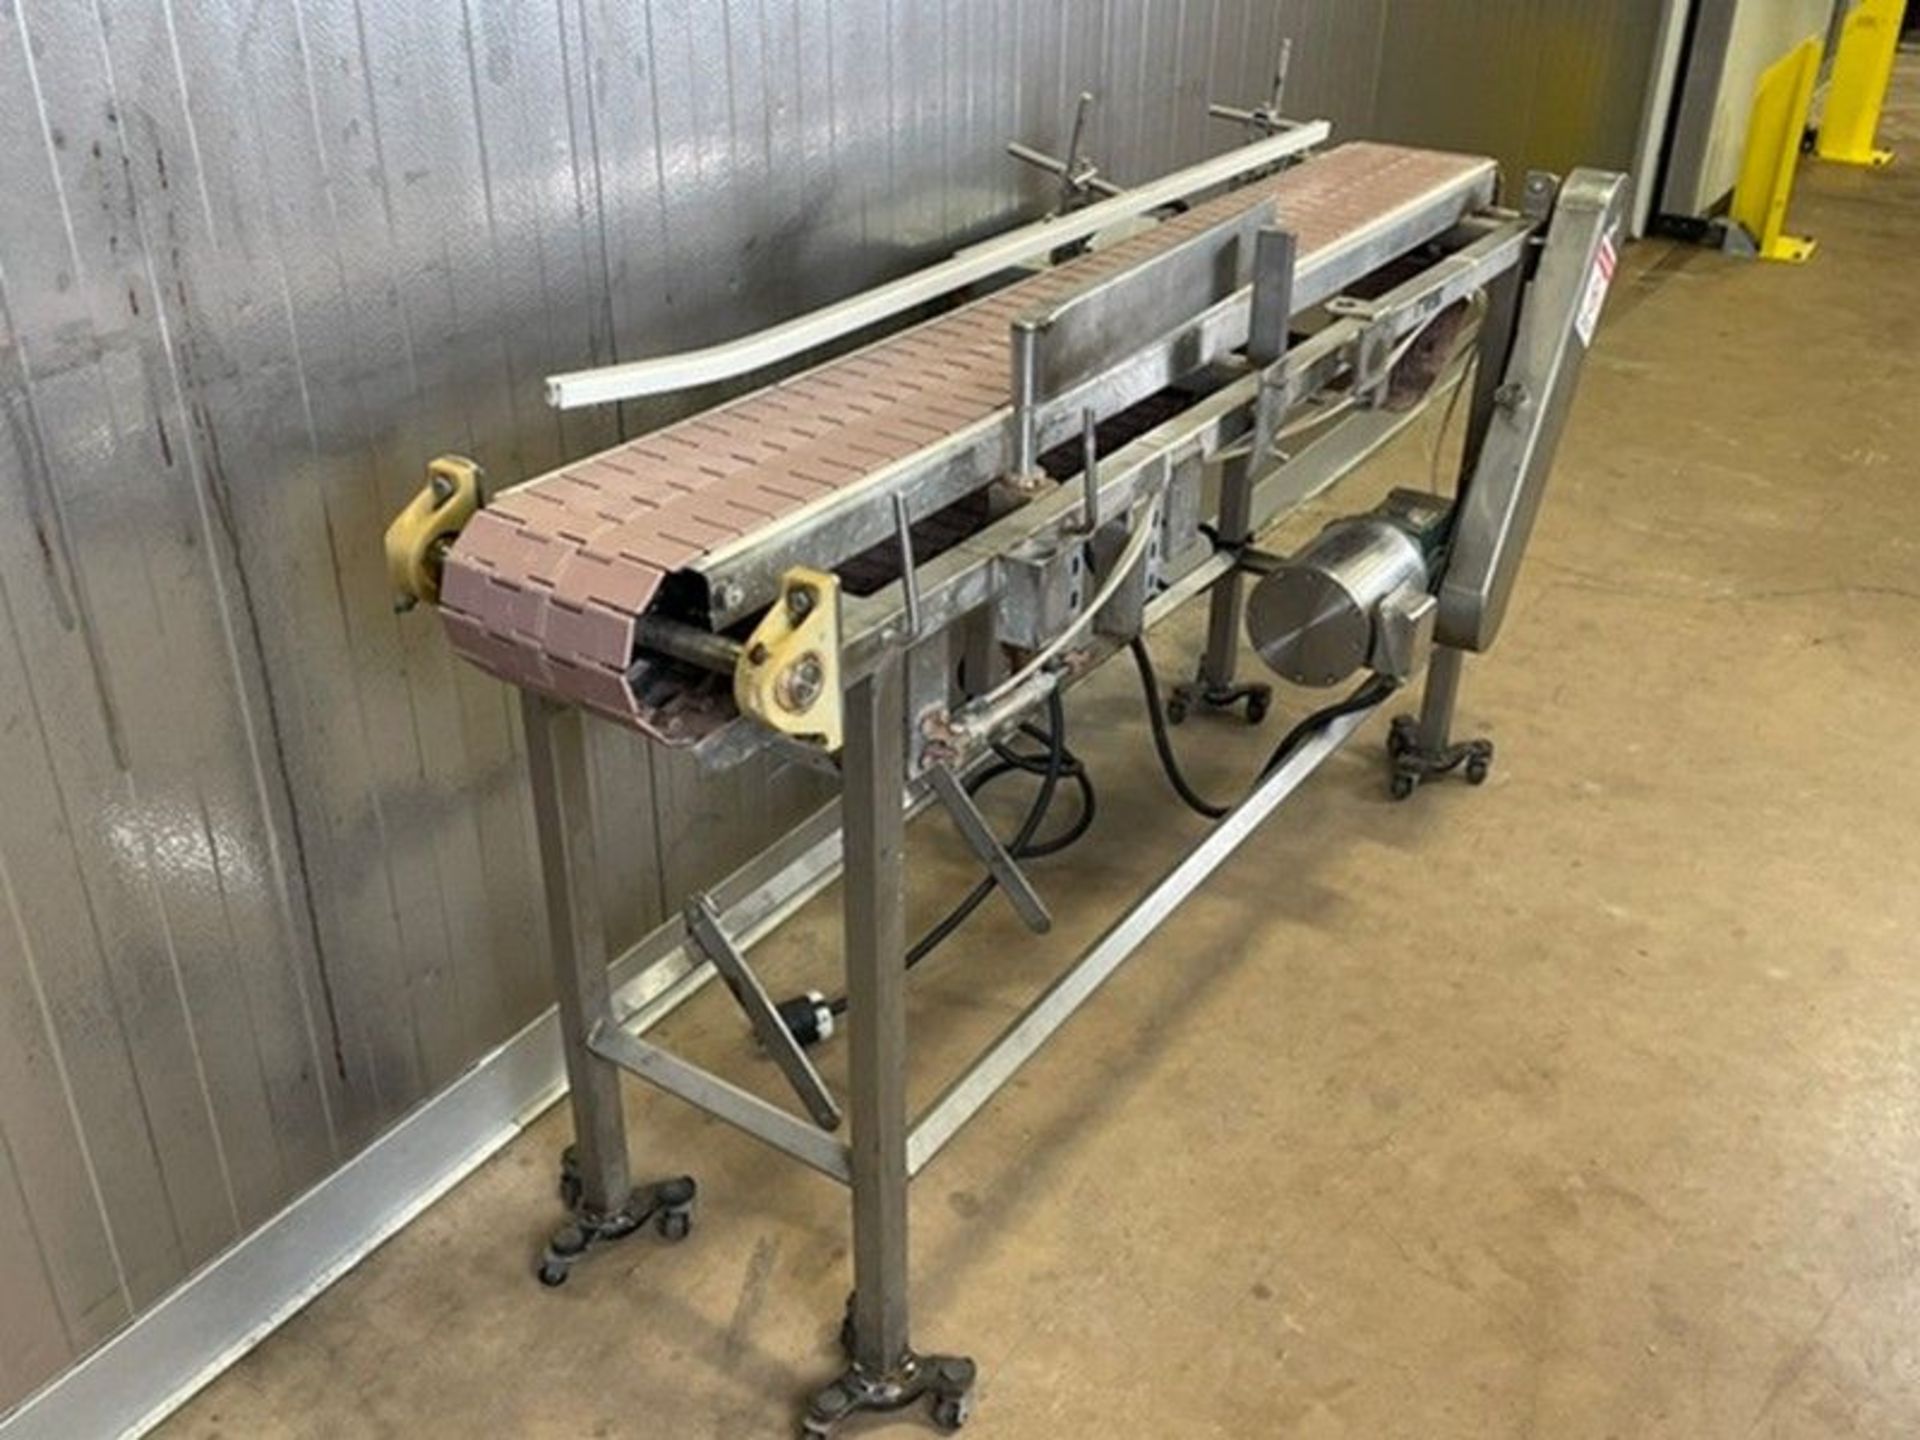 Straight Section 10" S/S Product Conveyor, Mounted on S/S Frame (Auction ID 80f02d30) (Handling, - Image 4 of 5